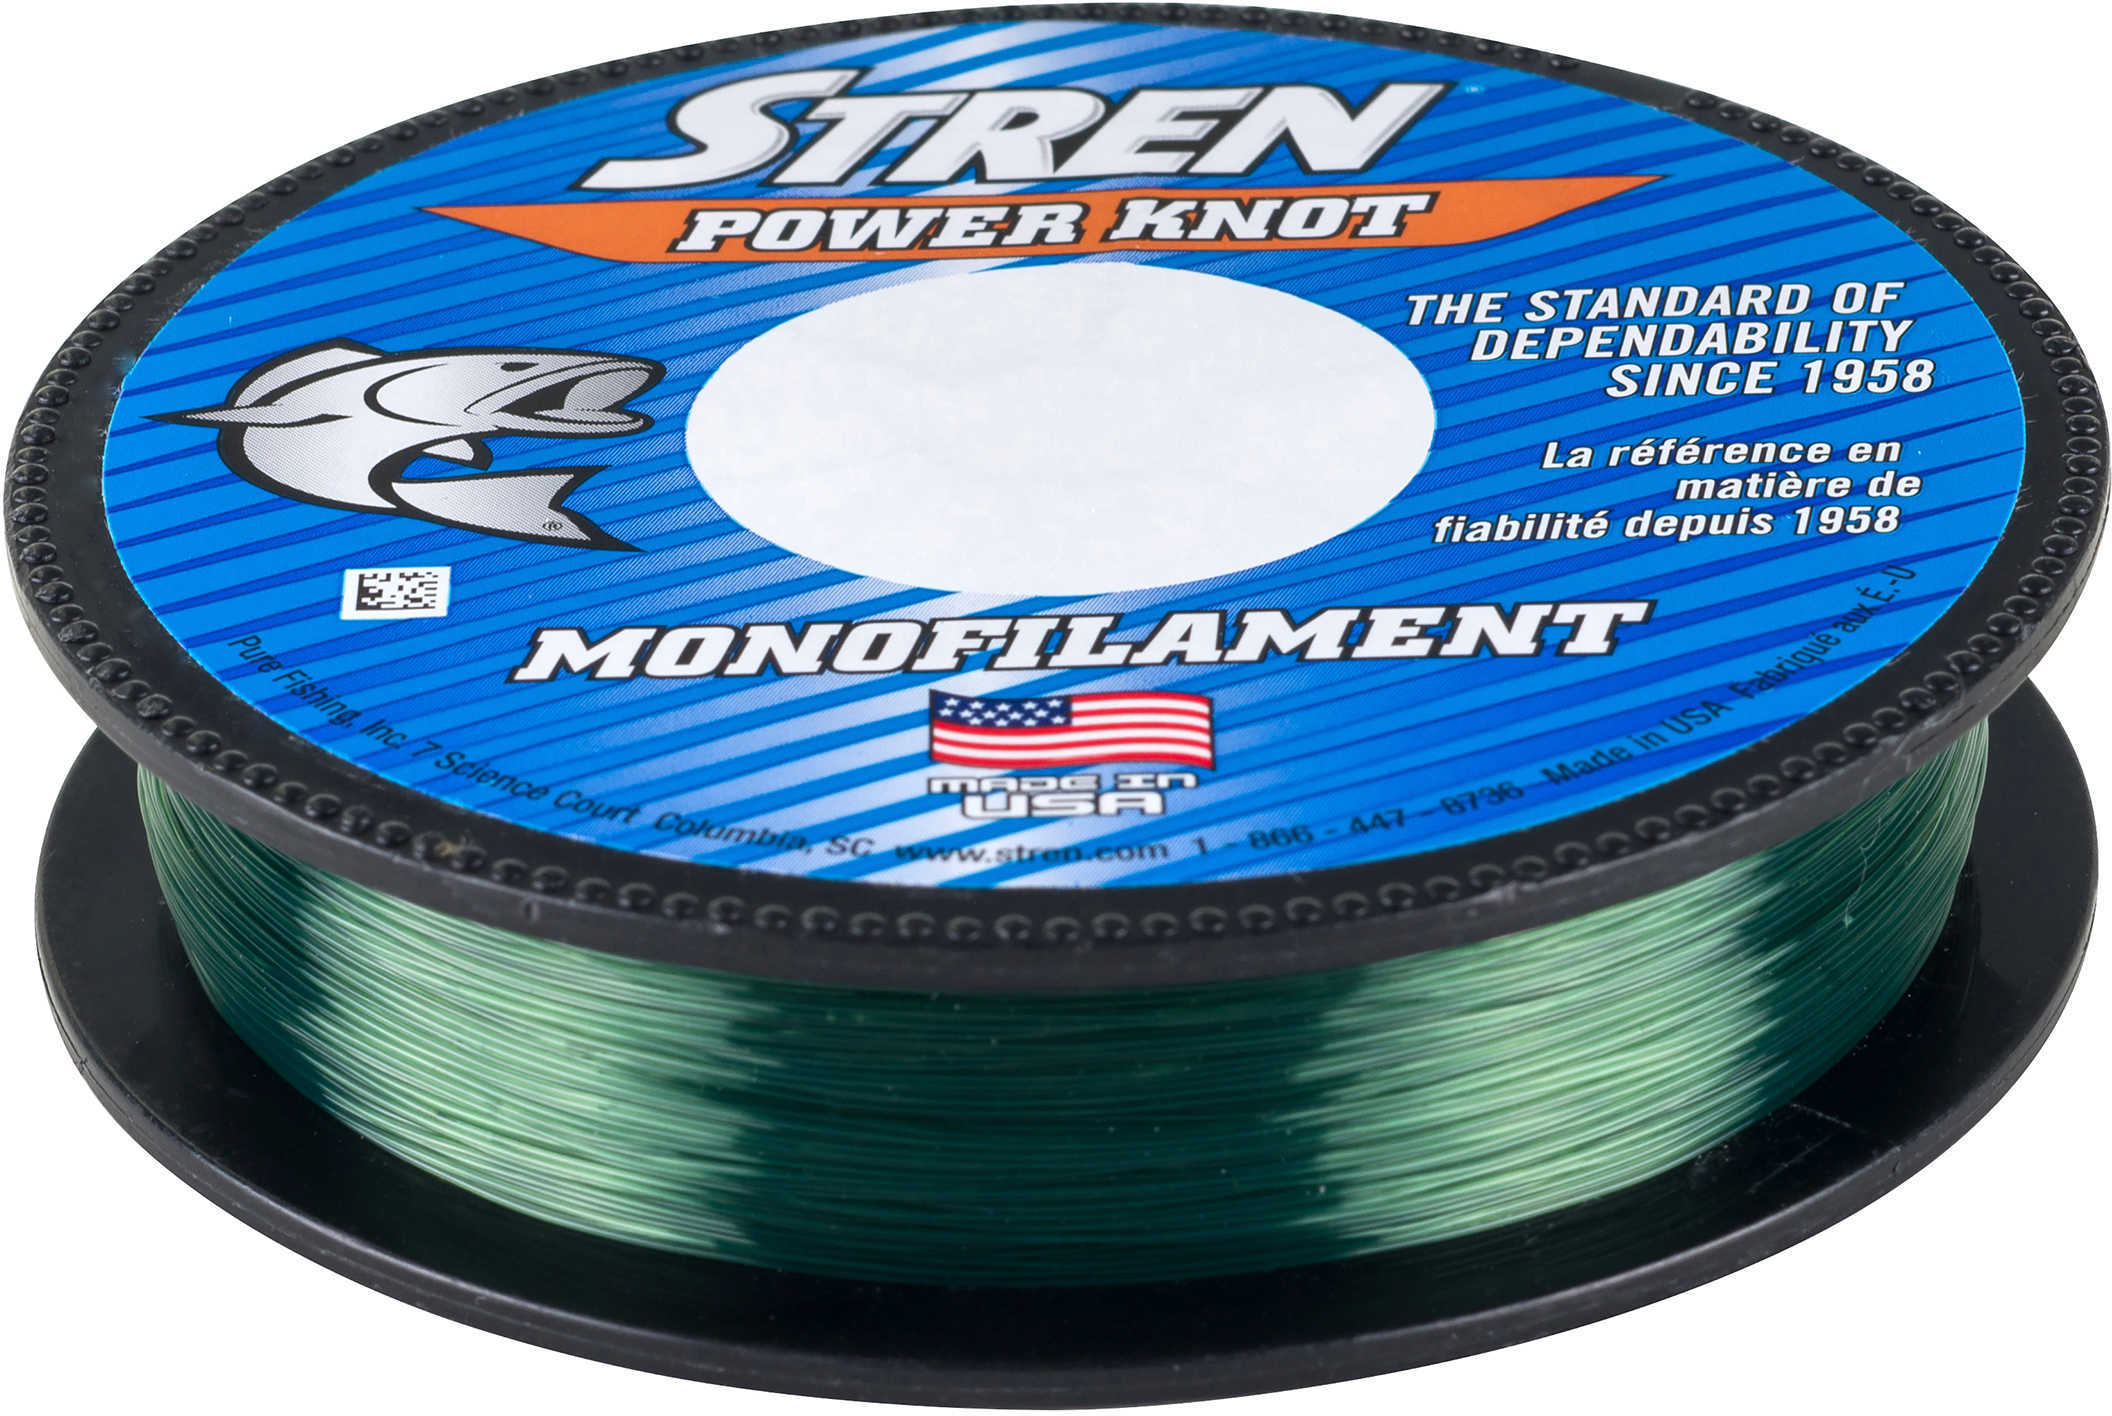 Power Knot 220 Yards , 12 lbs Strength, 0.014", Lo-Vis Green Md: 1367562